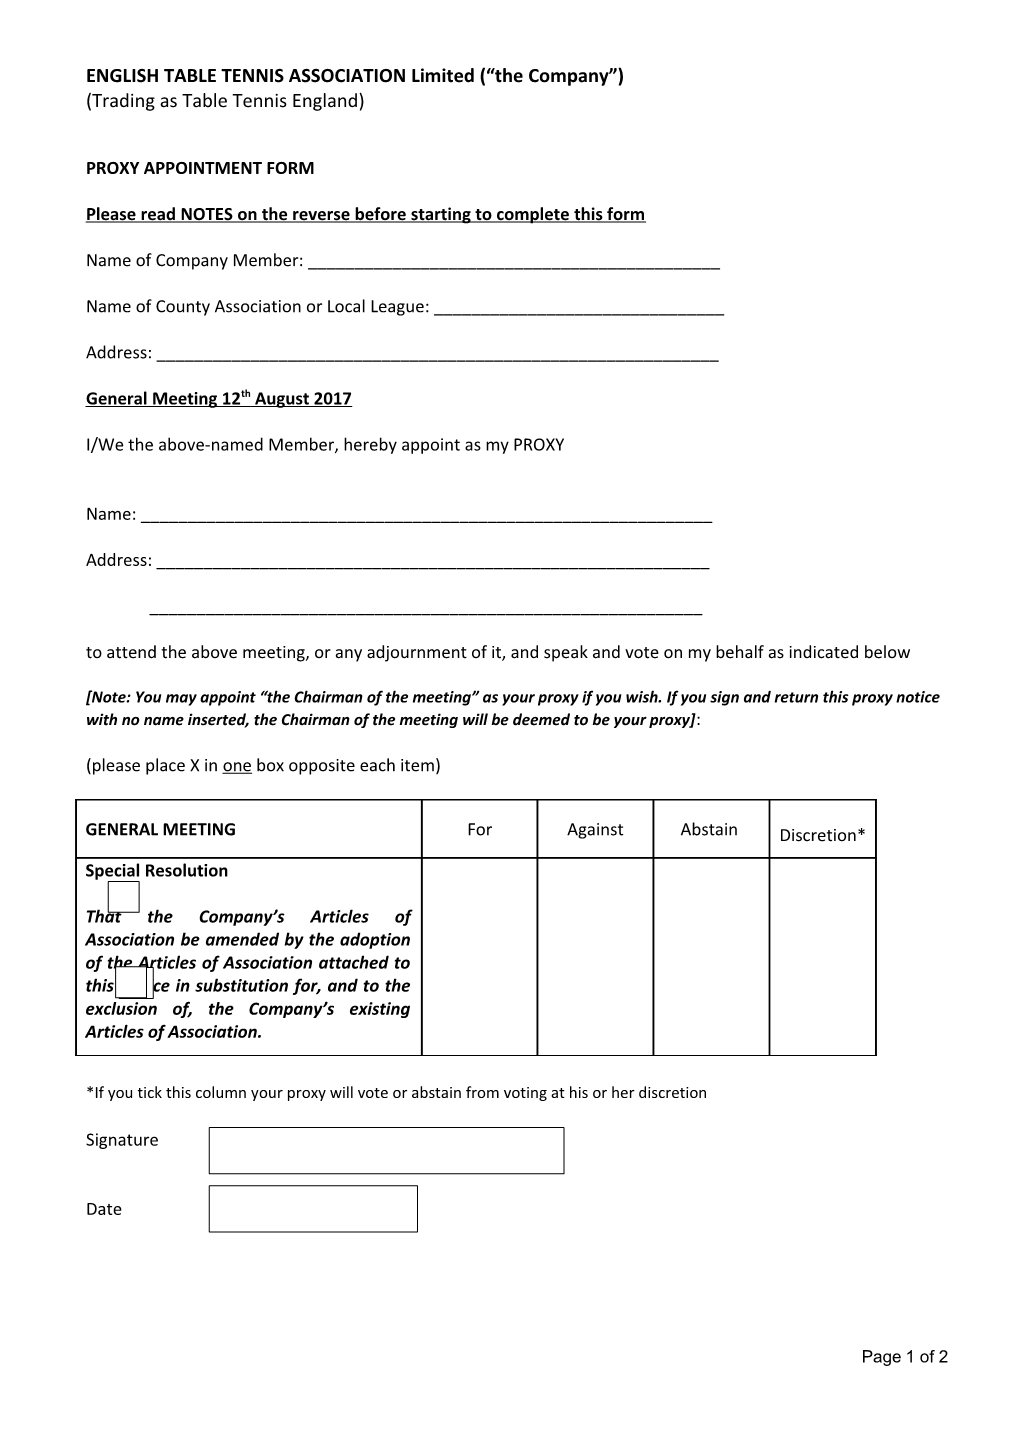 Proxy Appointment Form